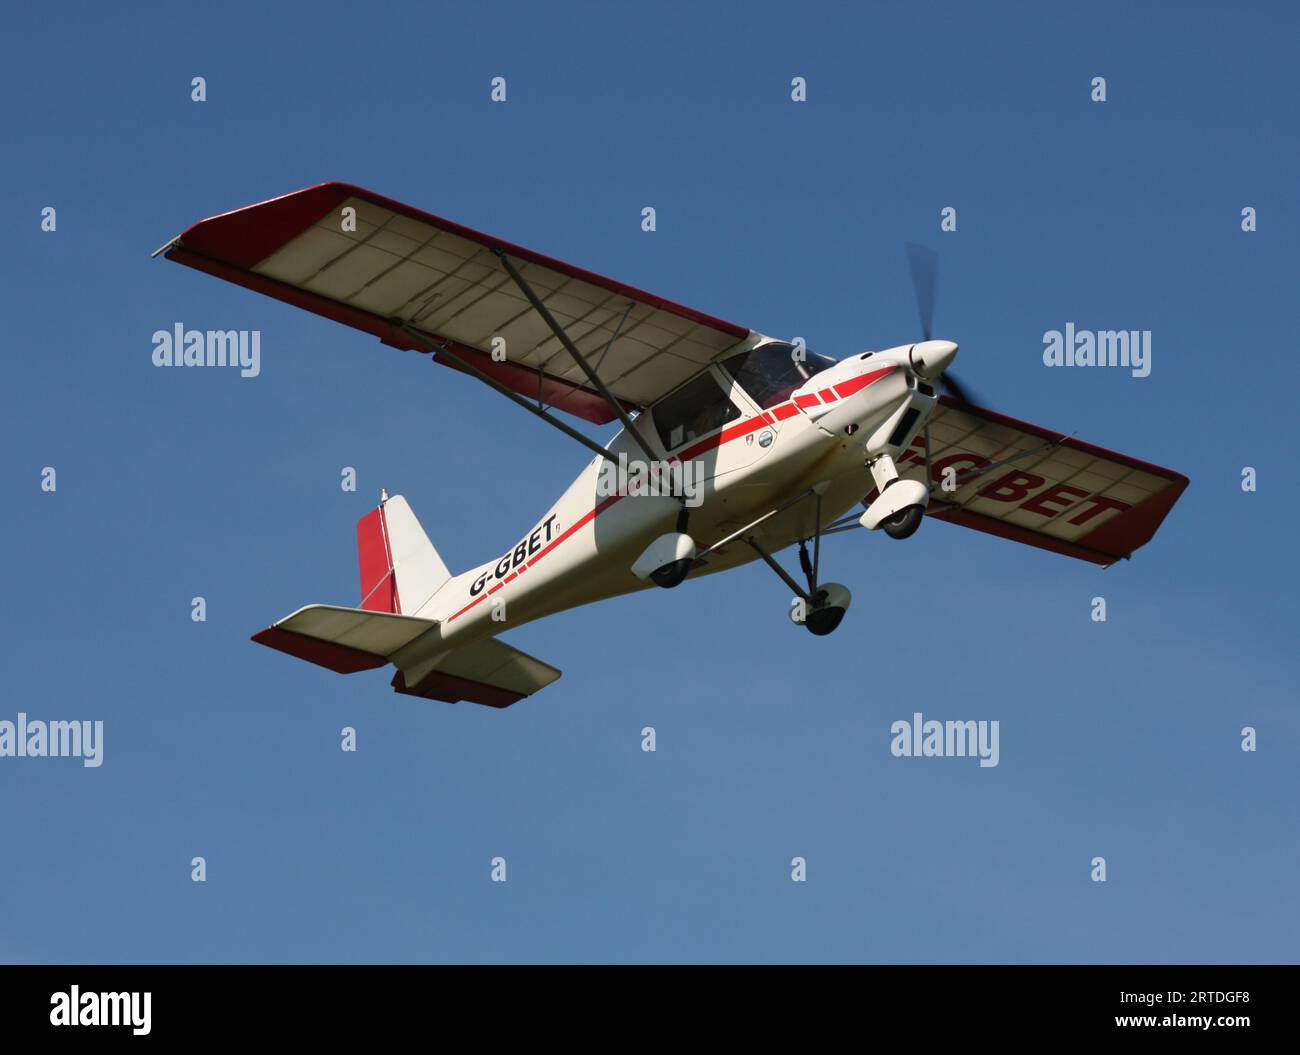 Ikarus C42 ultralight aircraft at a grass airfield in the UK Stock Photo -  Alamy